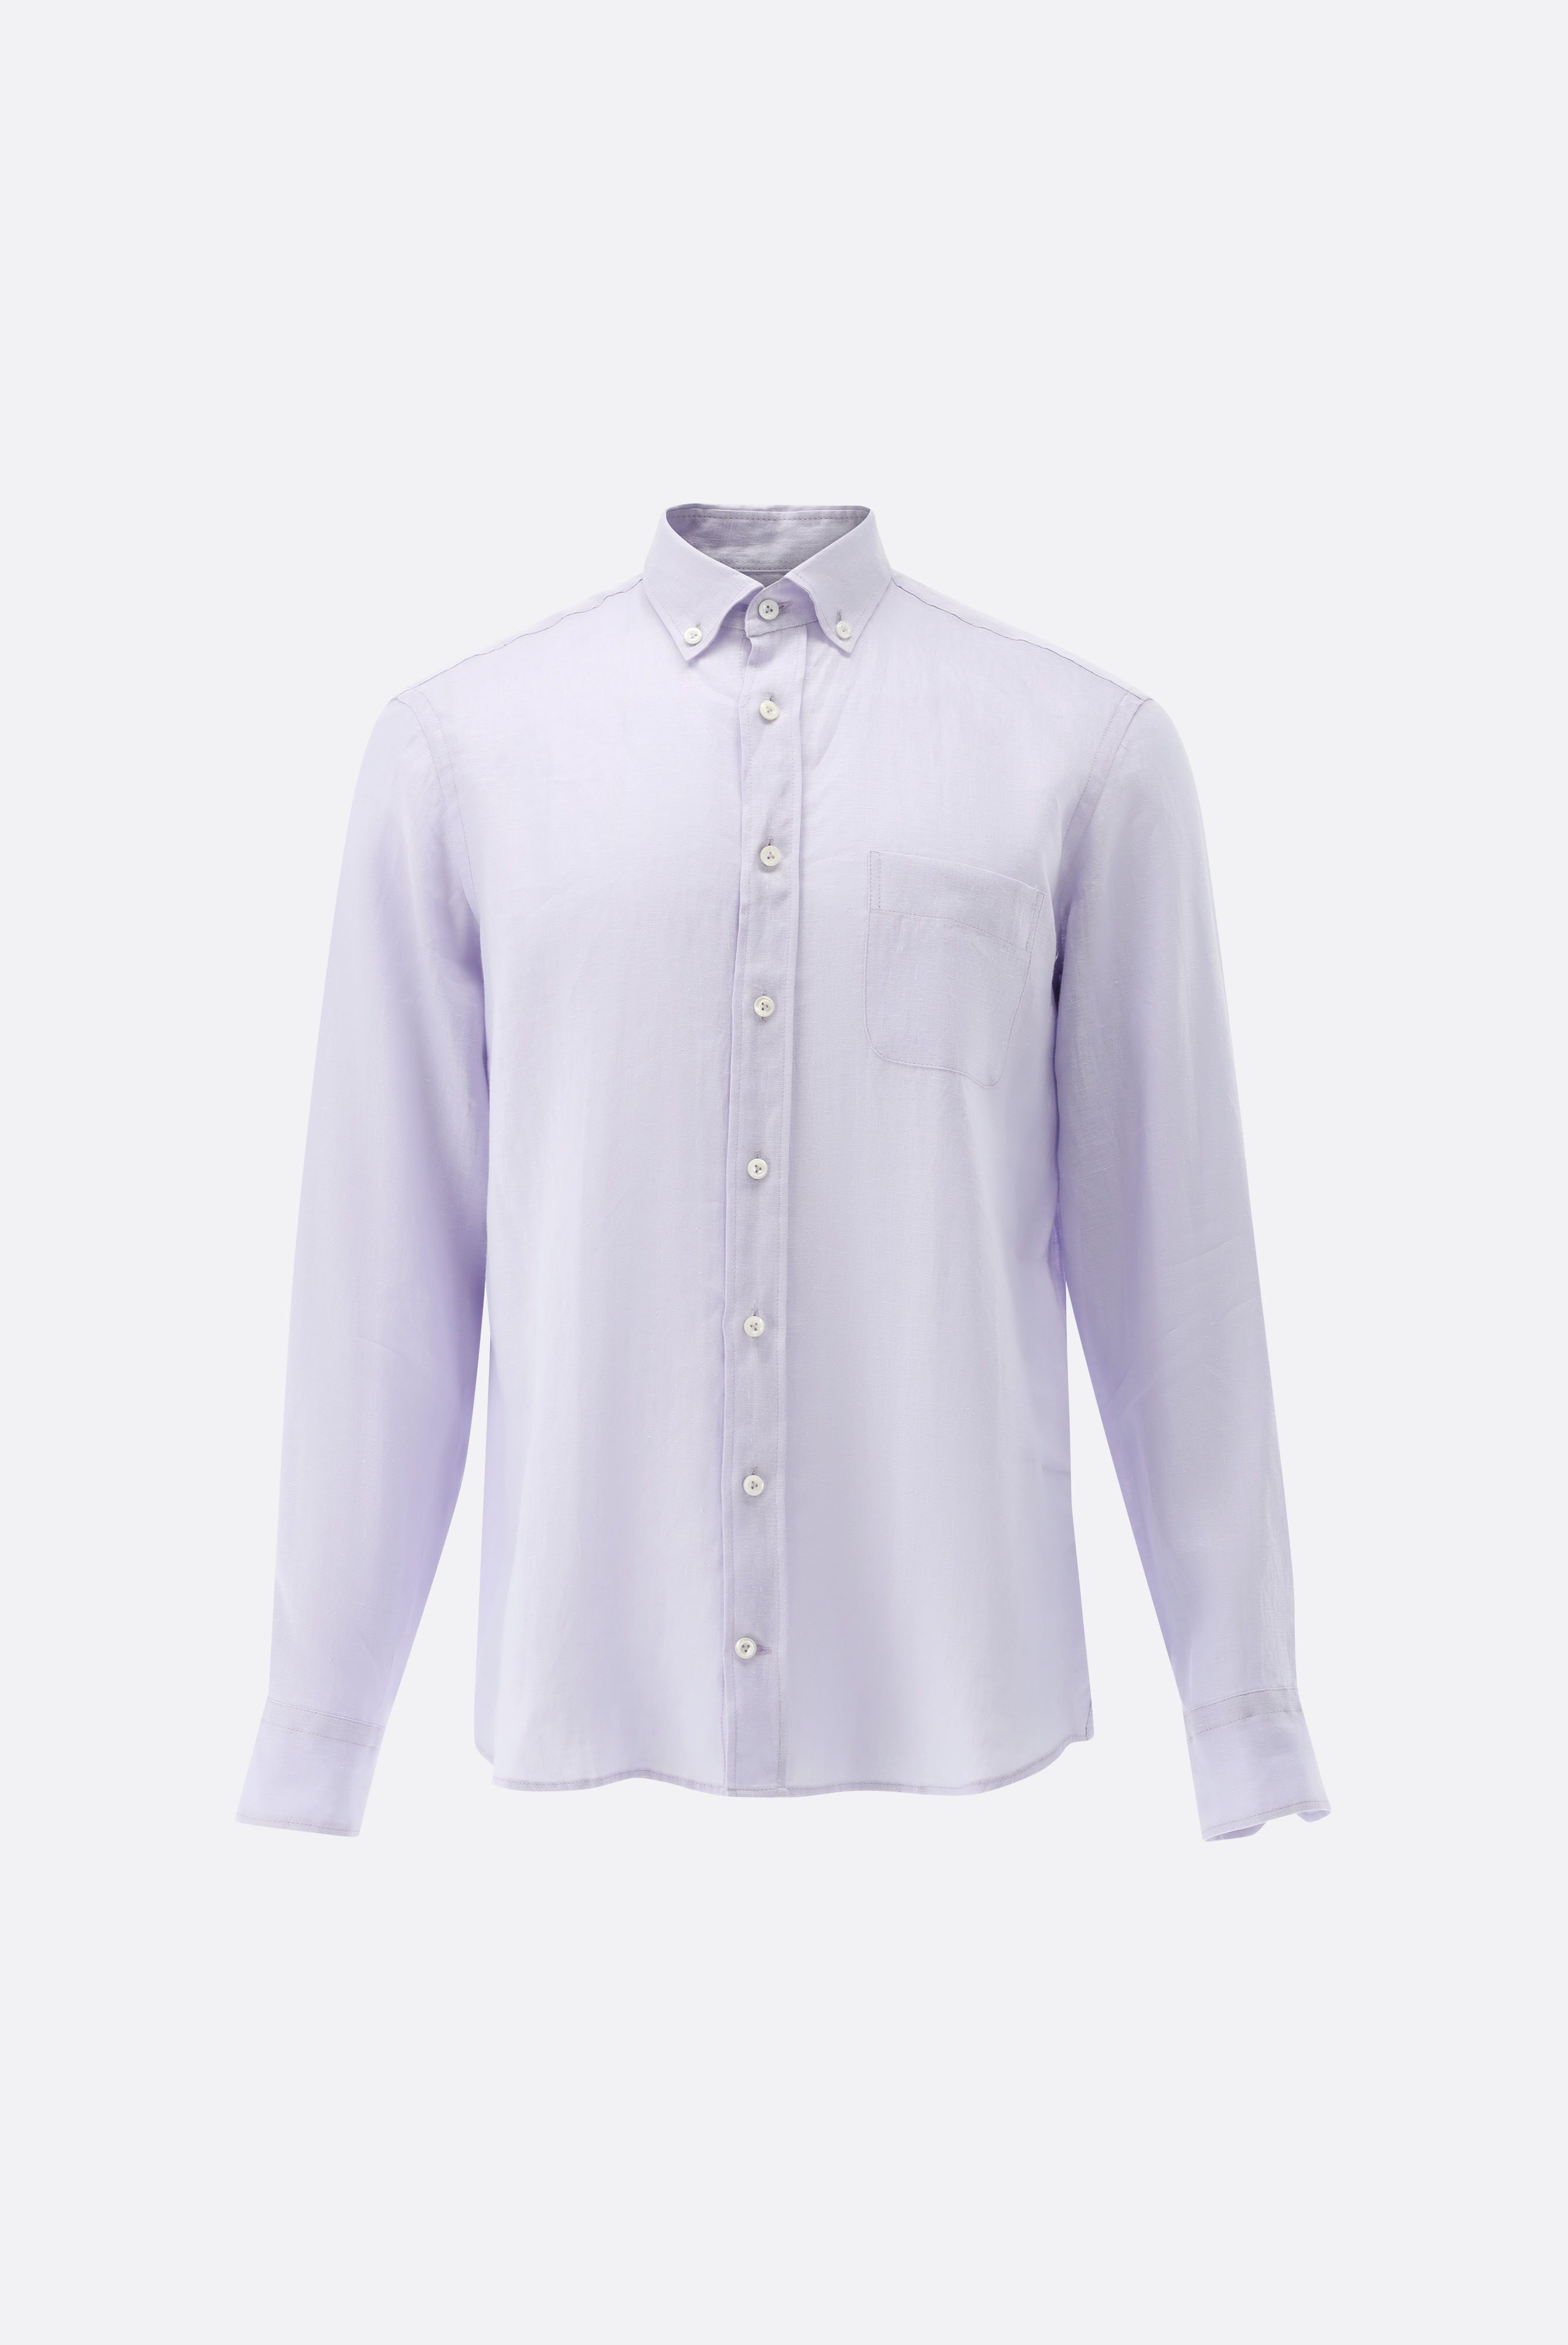 Casual Shirts+Linen Button-Down Collar Shirt Tailor Fit+20.2013.9V.150555.610.38